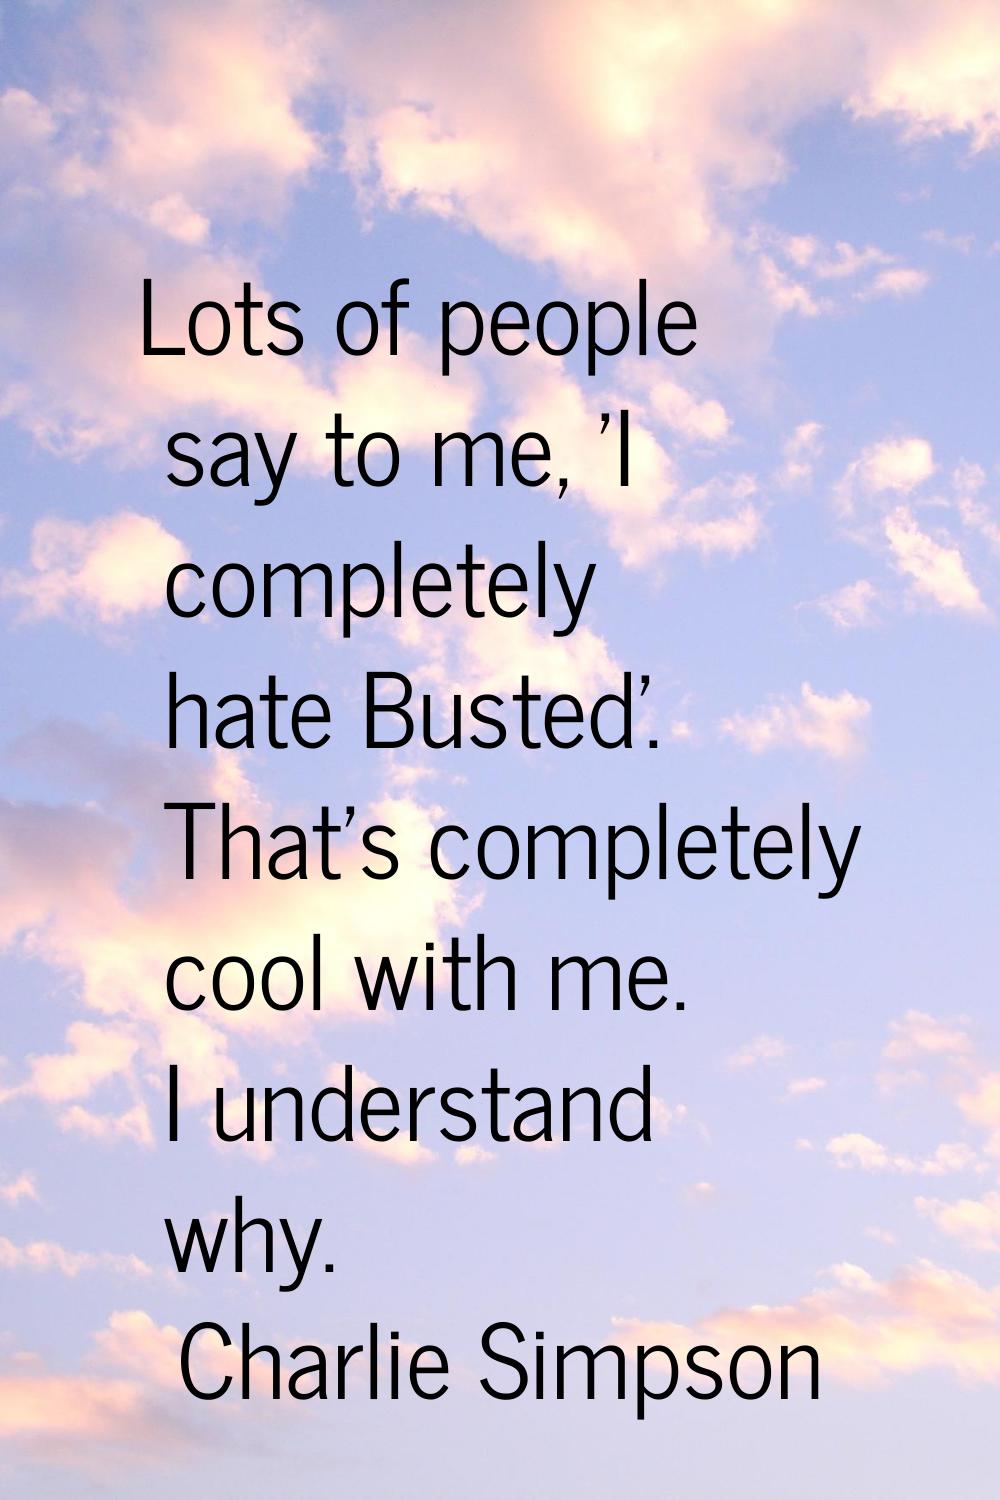 Lots of people say to me, 'I completely hate Busted'. That's completely cool with me. I understand 